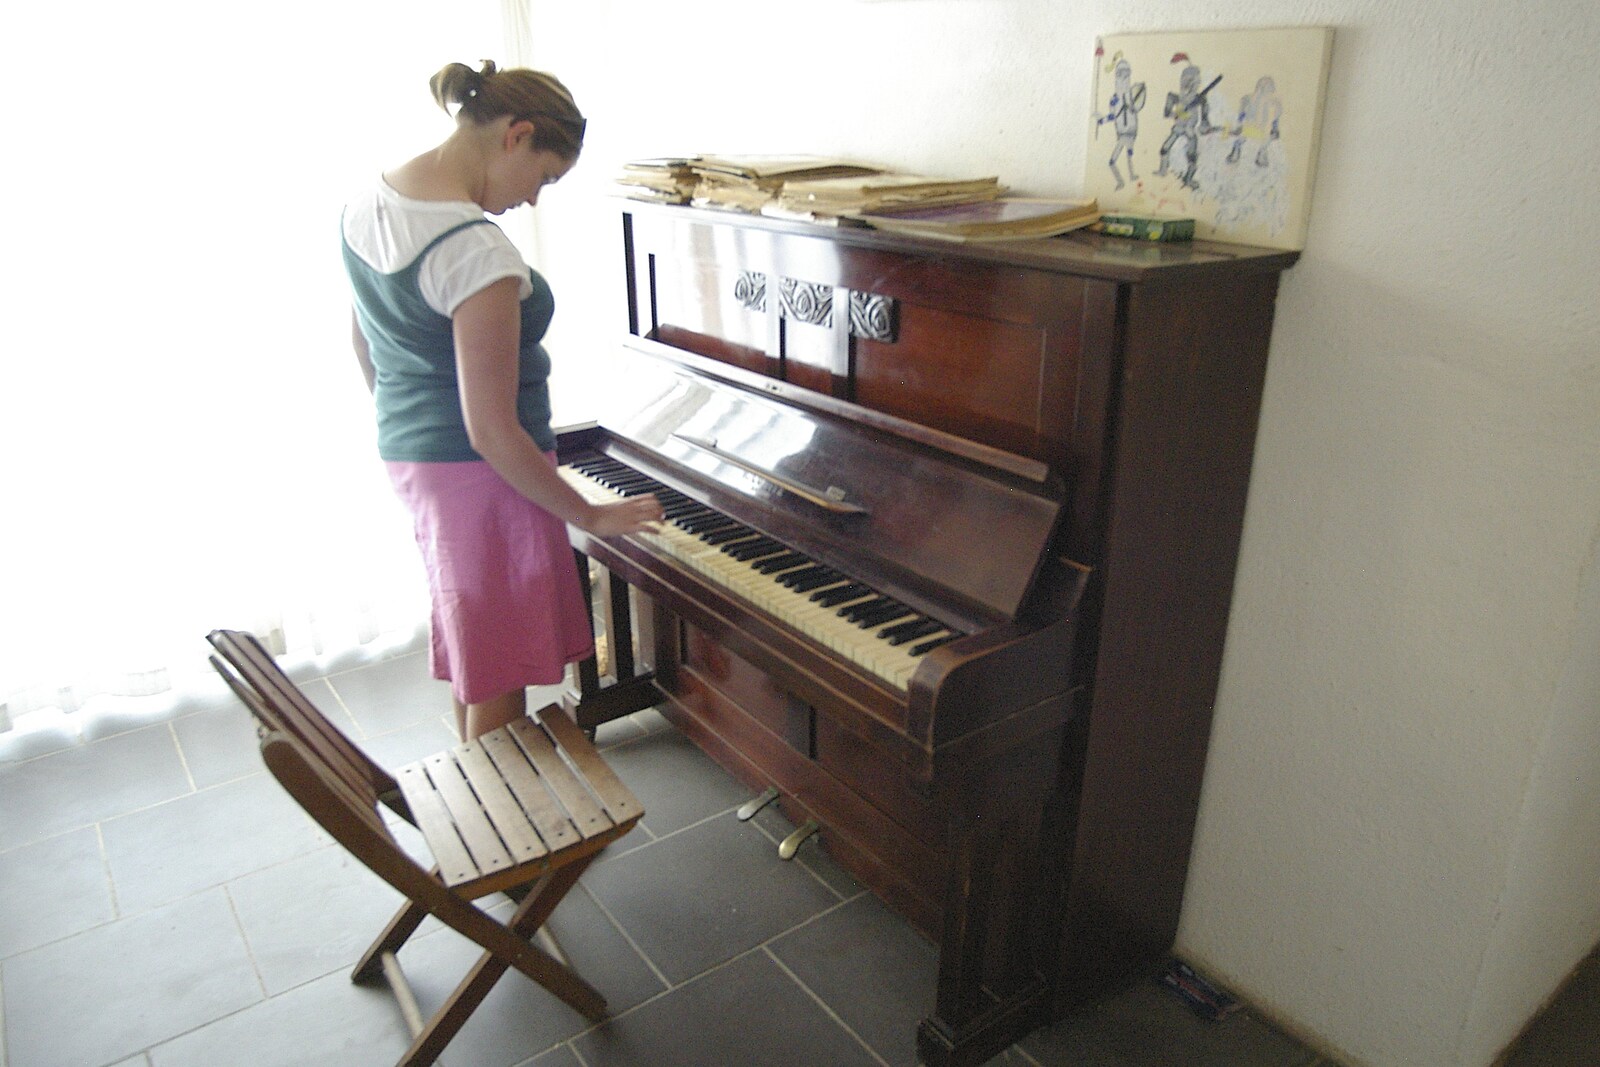 Isobel plays piano, as it echoes around the house from A Roussillon Farmhouse, Fourques, Perpignan, France - 17th September 2006